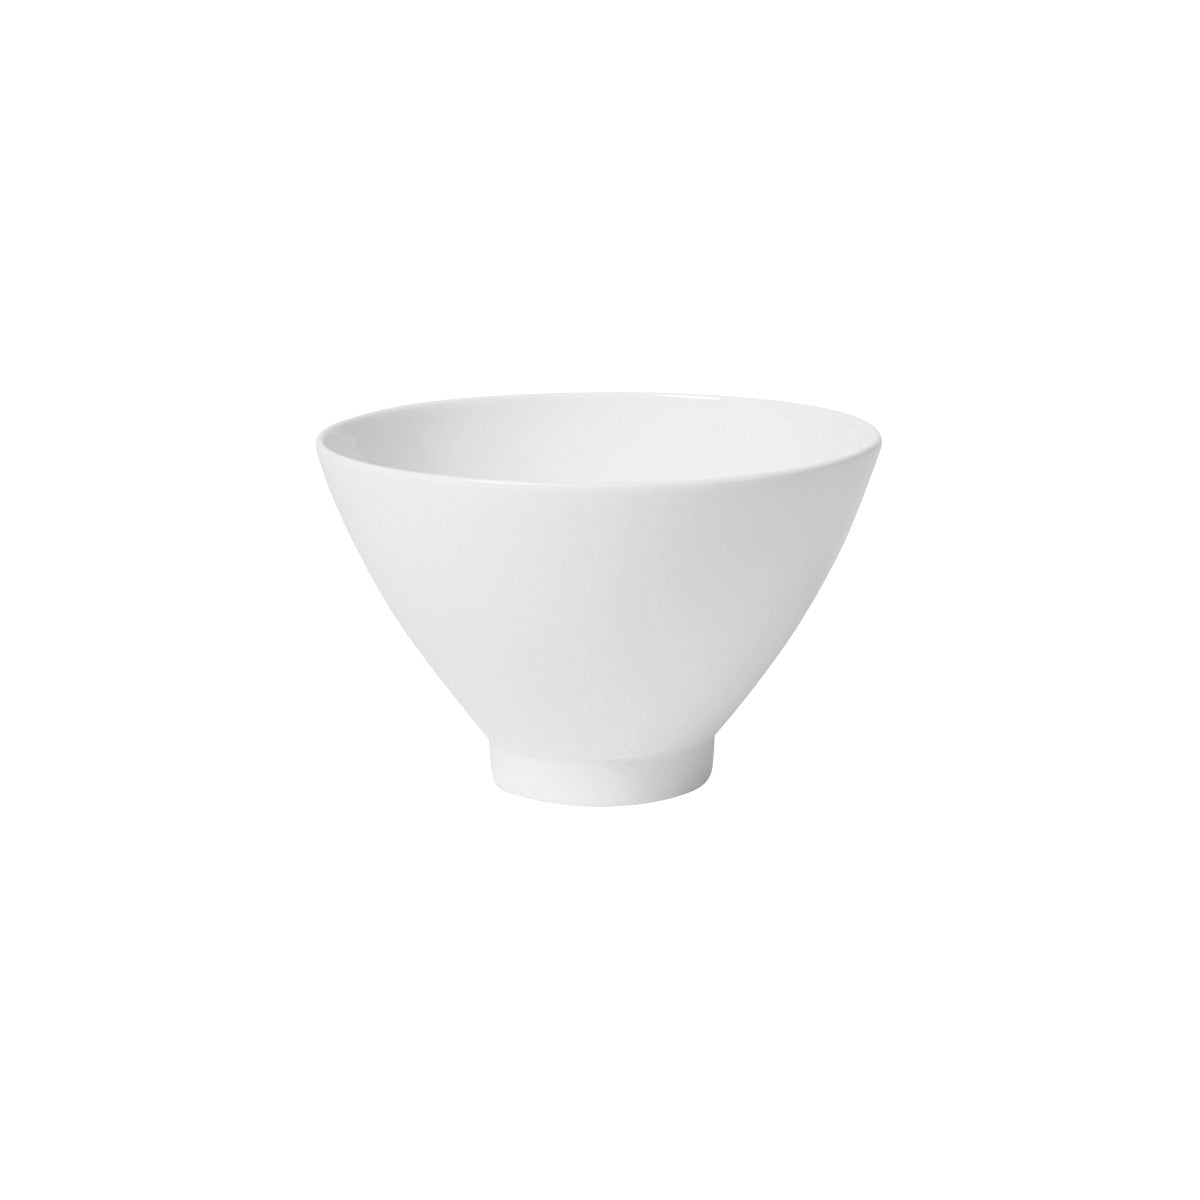 VB16-3272-1900 Villeroy And Boch Villeroy And Boch Stella Hotel White Footed Bowl 600ml Tomkin Australia Hospitality Supplies